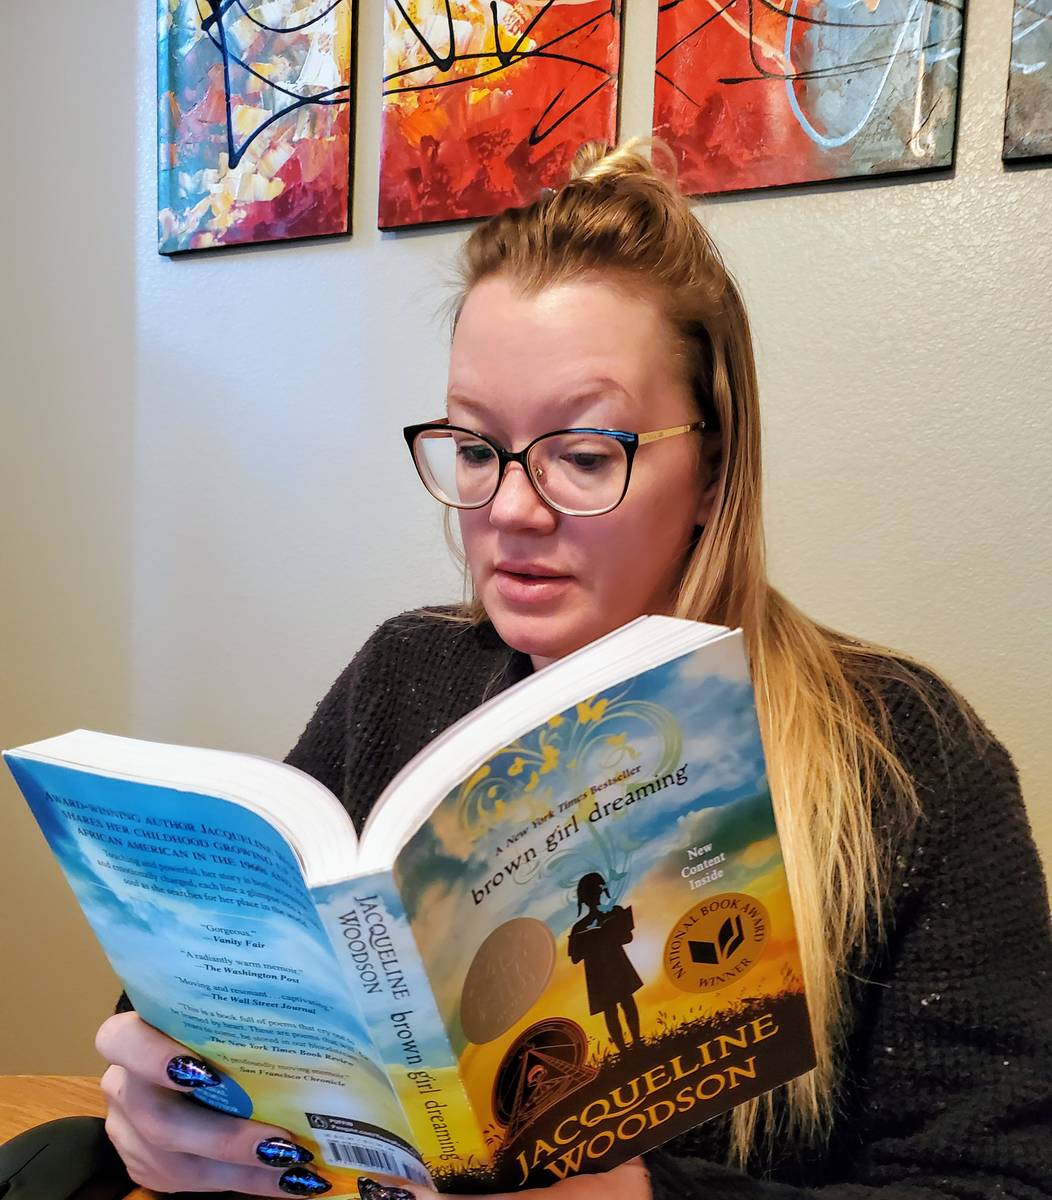 Ashley Price, a teacher at Monaco Middle School in Las Vegas, reads one of the books she reques ...